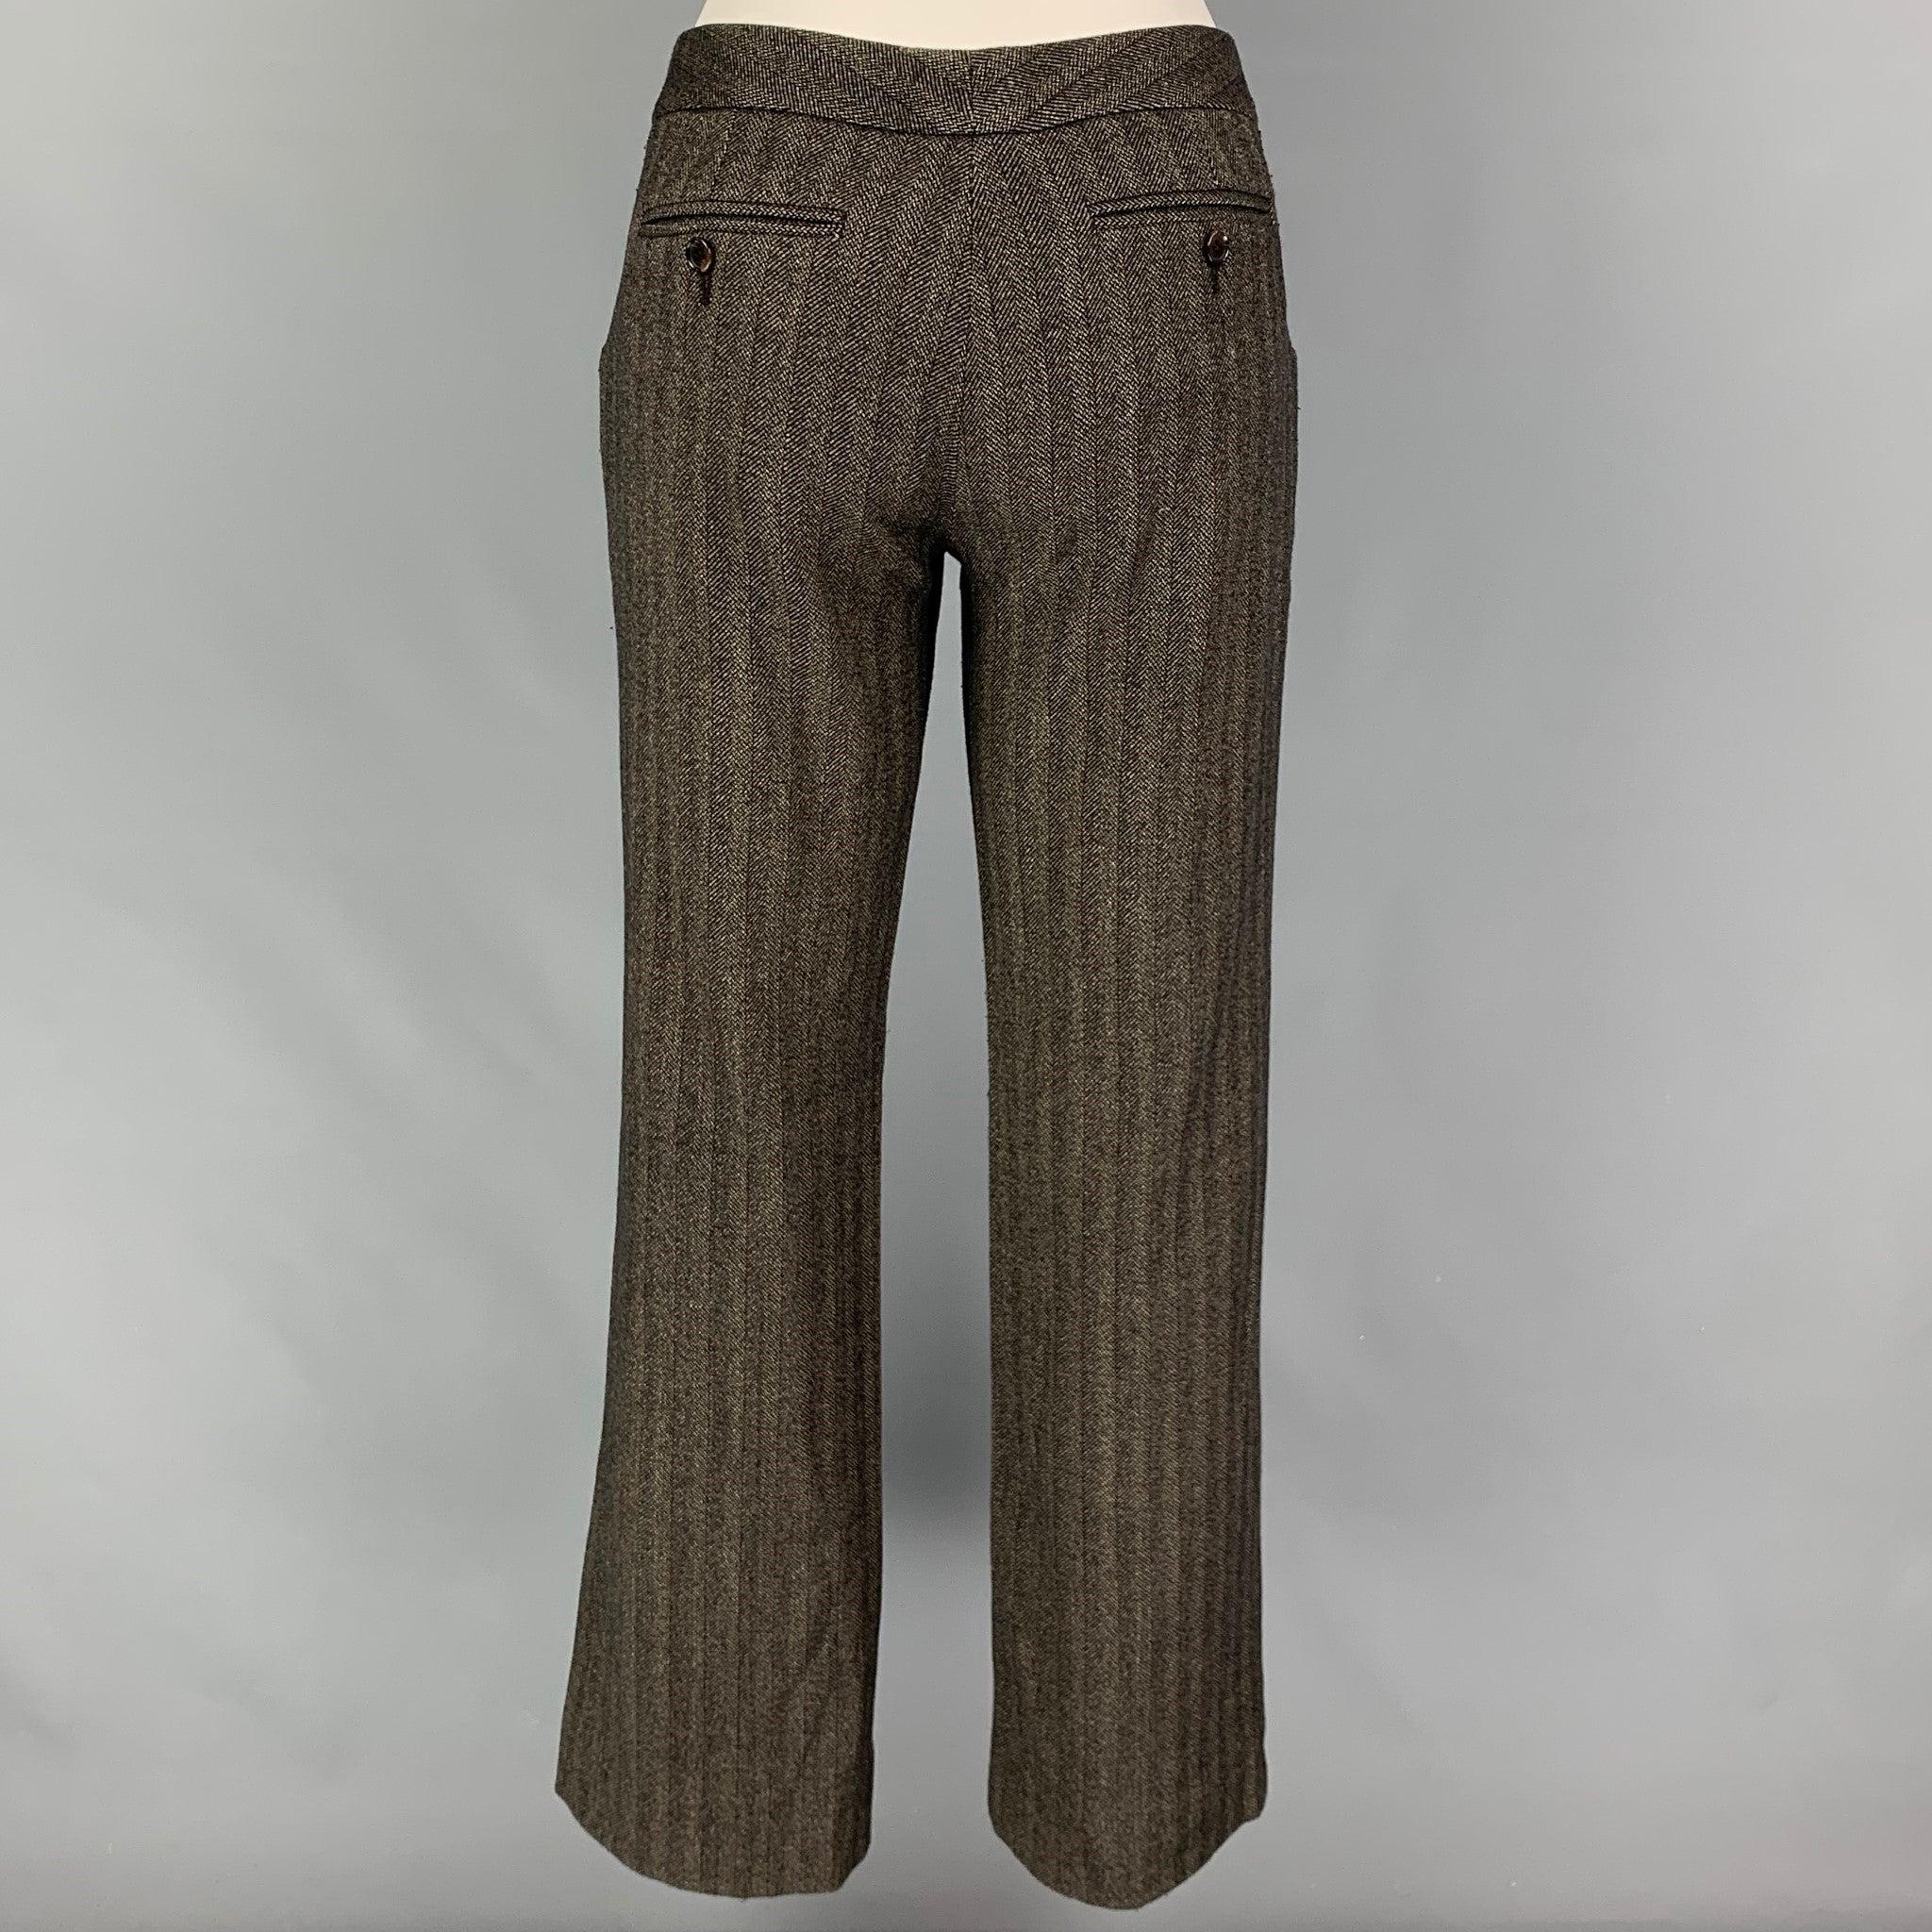 DOLCE & GABBANA pants comes in a brown & red herringbone wool blend featuring a low rise, flat front, and a zip fly closure. Made in Italy. Very Good
 Pre-Owned Condition. 
 

 Marked:  42 
 

 Measurements: 
  Waist: 32 inches Rise: 8.5 inches